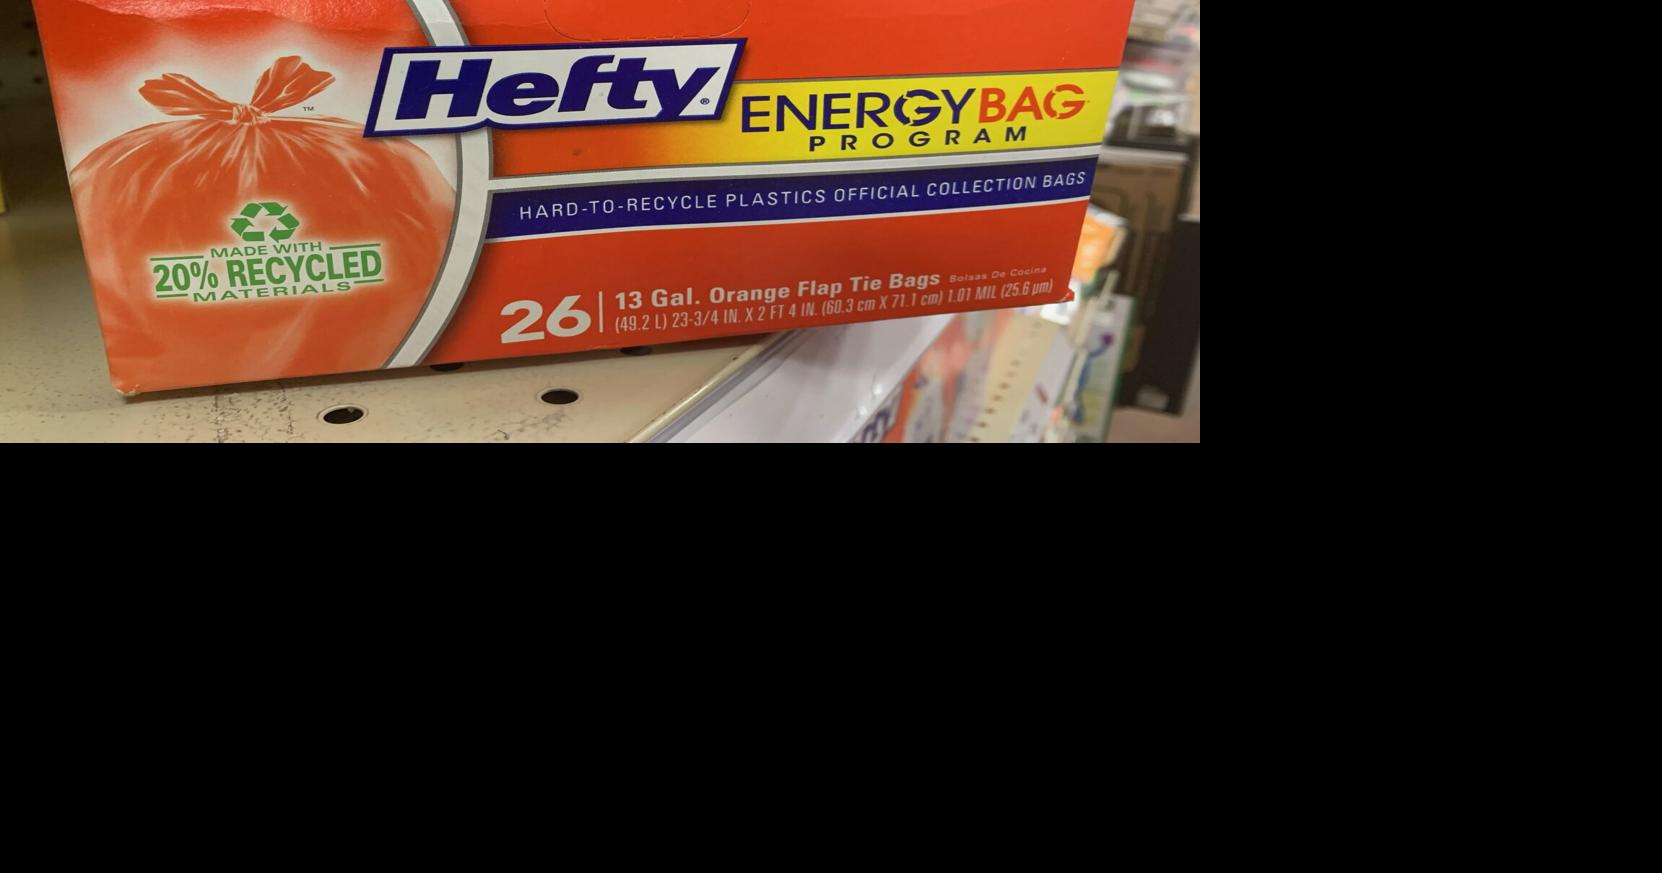 Gwinnett to join Hefty Energy Bag program for hard-to-recycle items, News